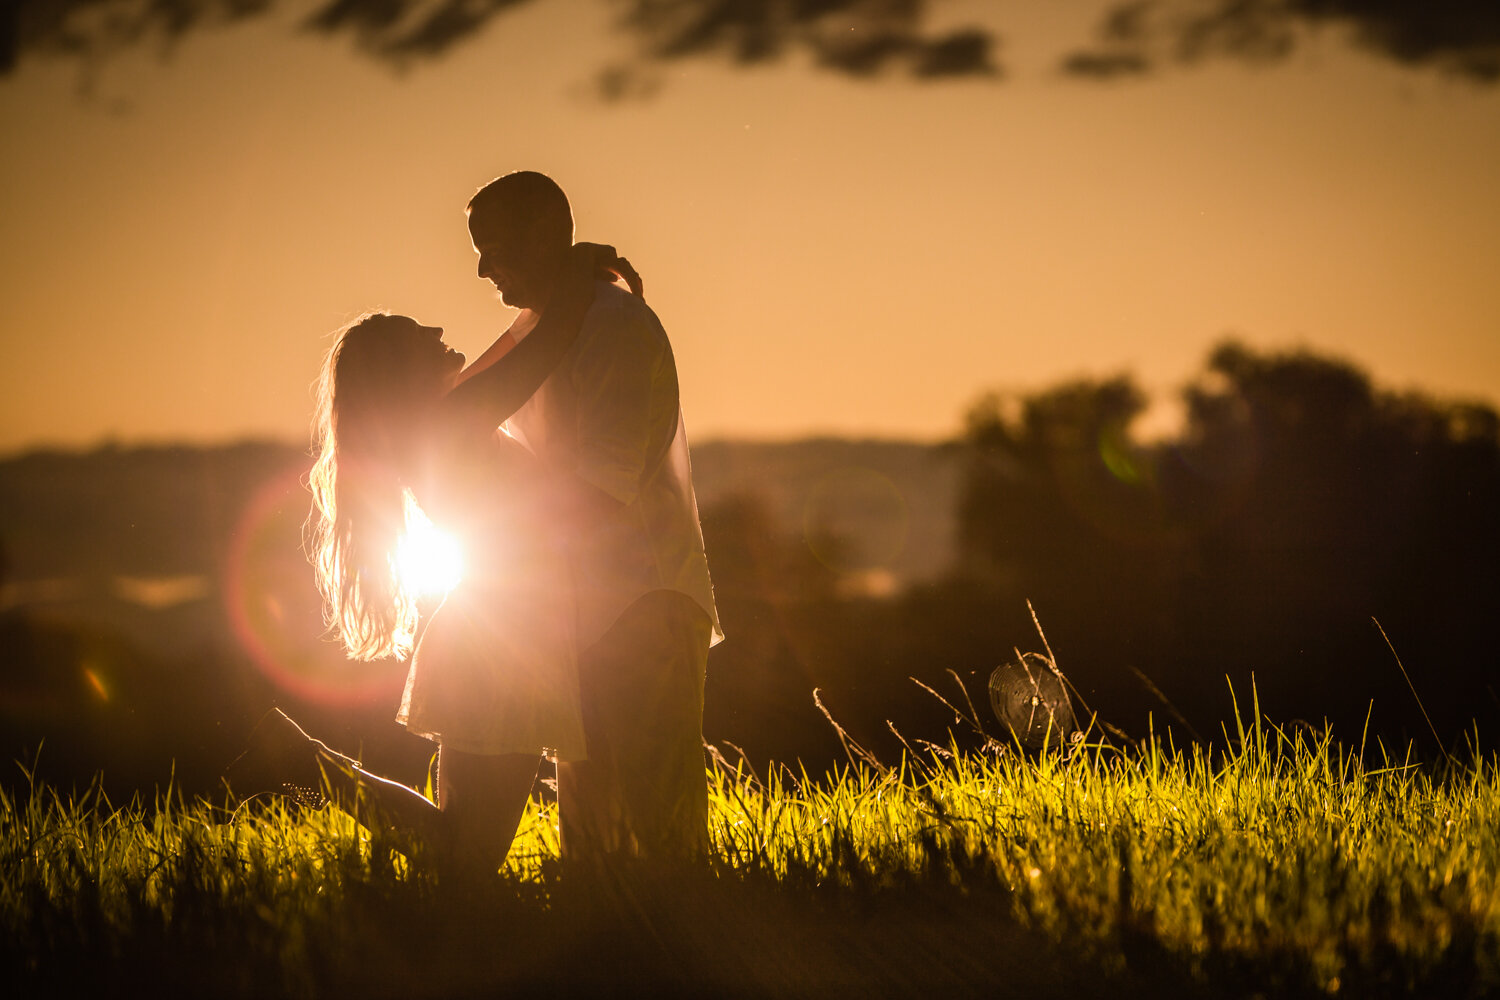  Sunset Engagments at Sandstone Ranch. Take by Jared M. Gant 